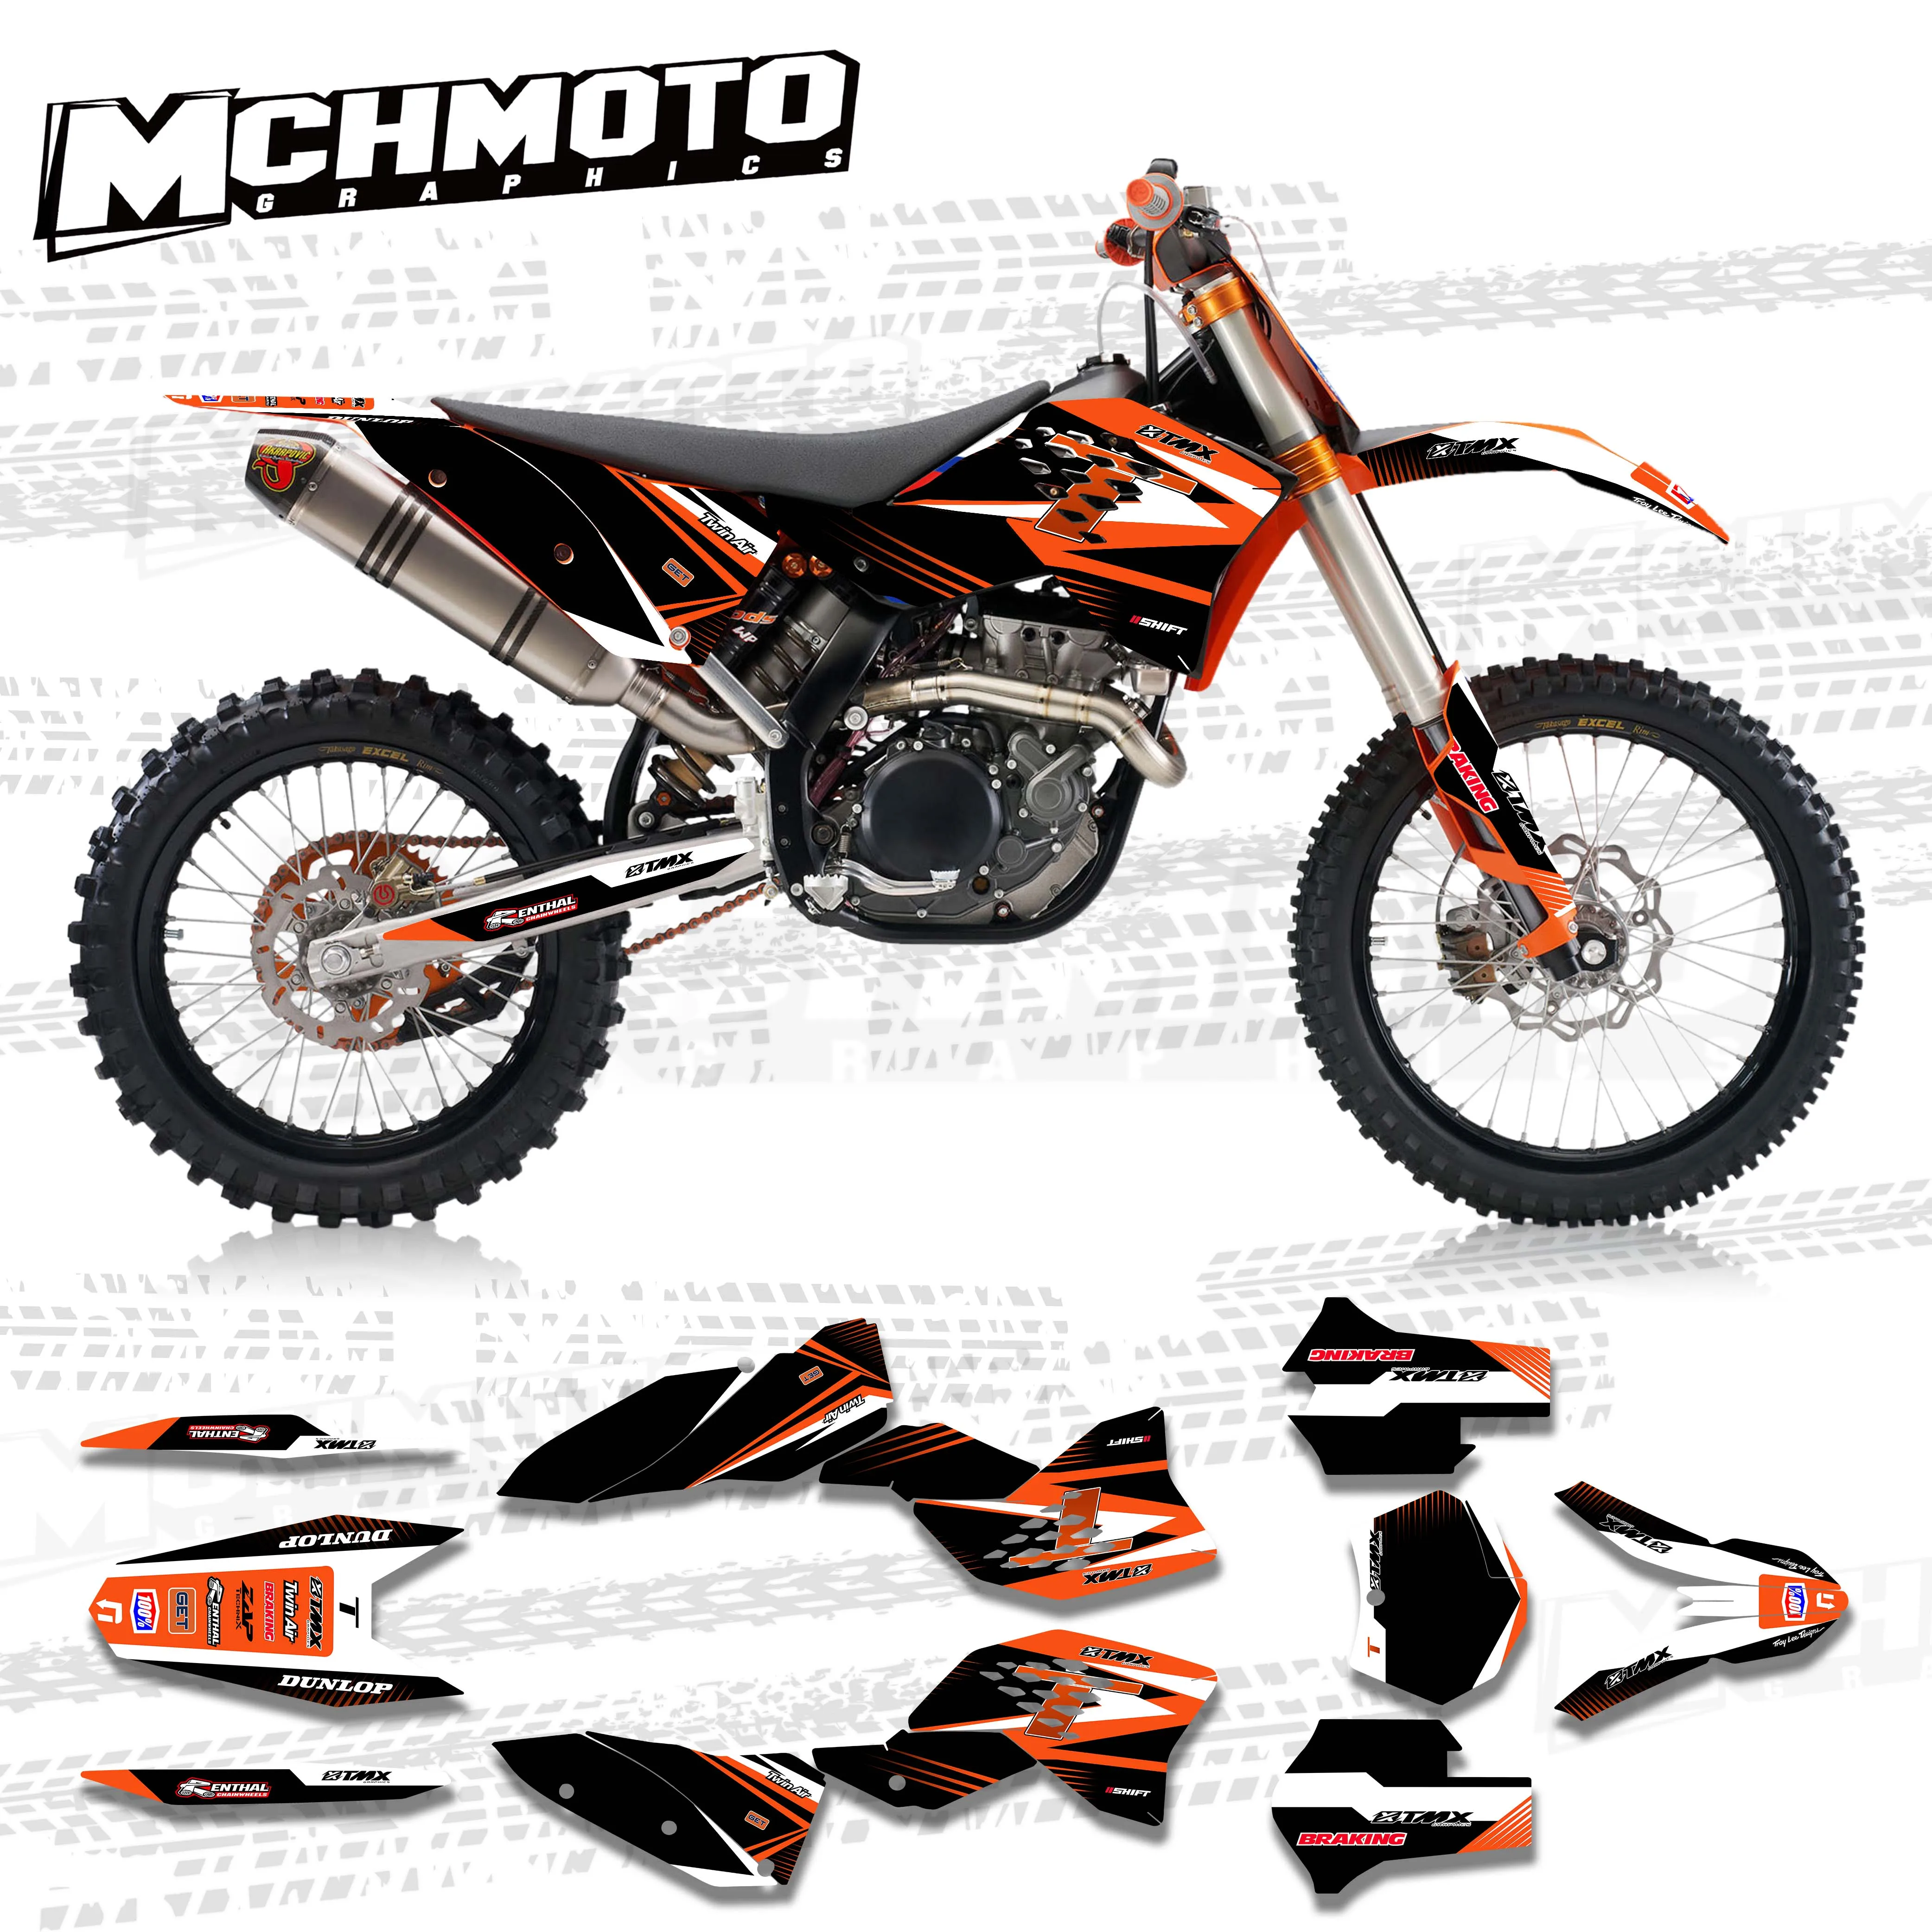 MCHMFG For KTM EXC SXF 125 250 300 450 530 2008 2009 2010 2011 Full Graphics Decals Stickers Motorcycle Background